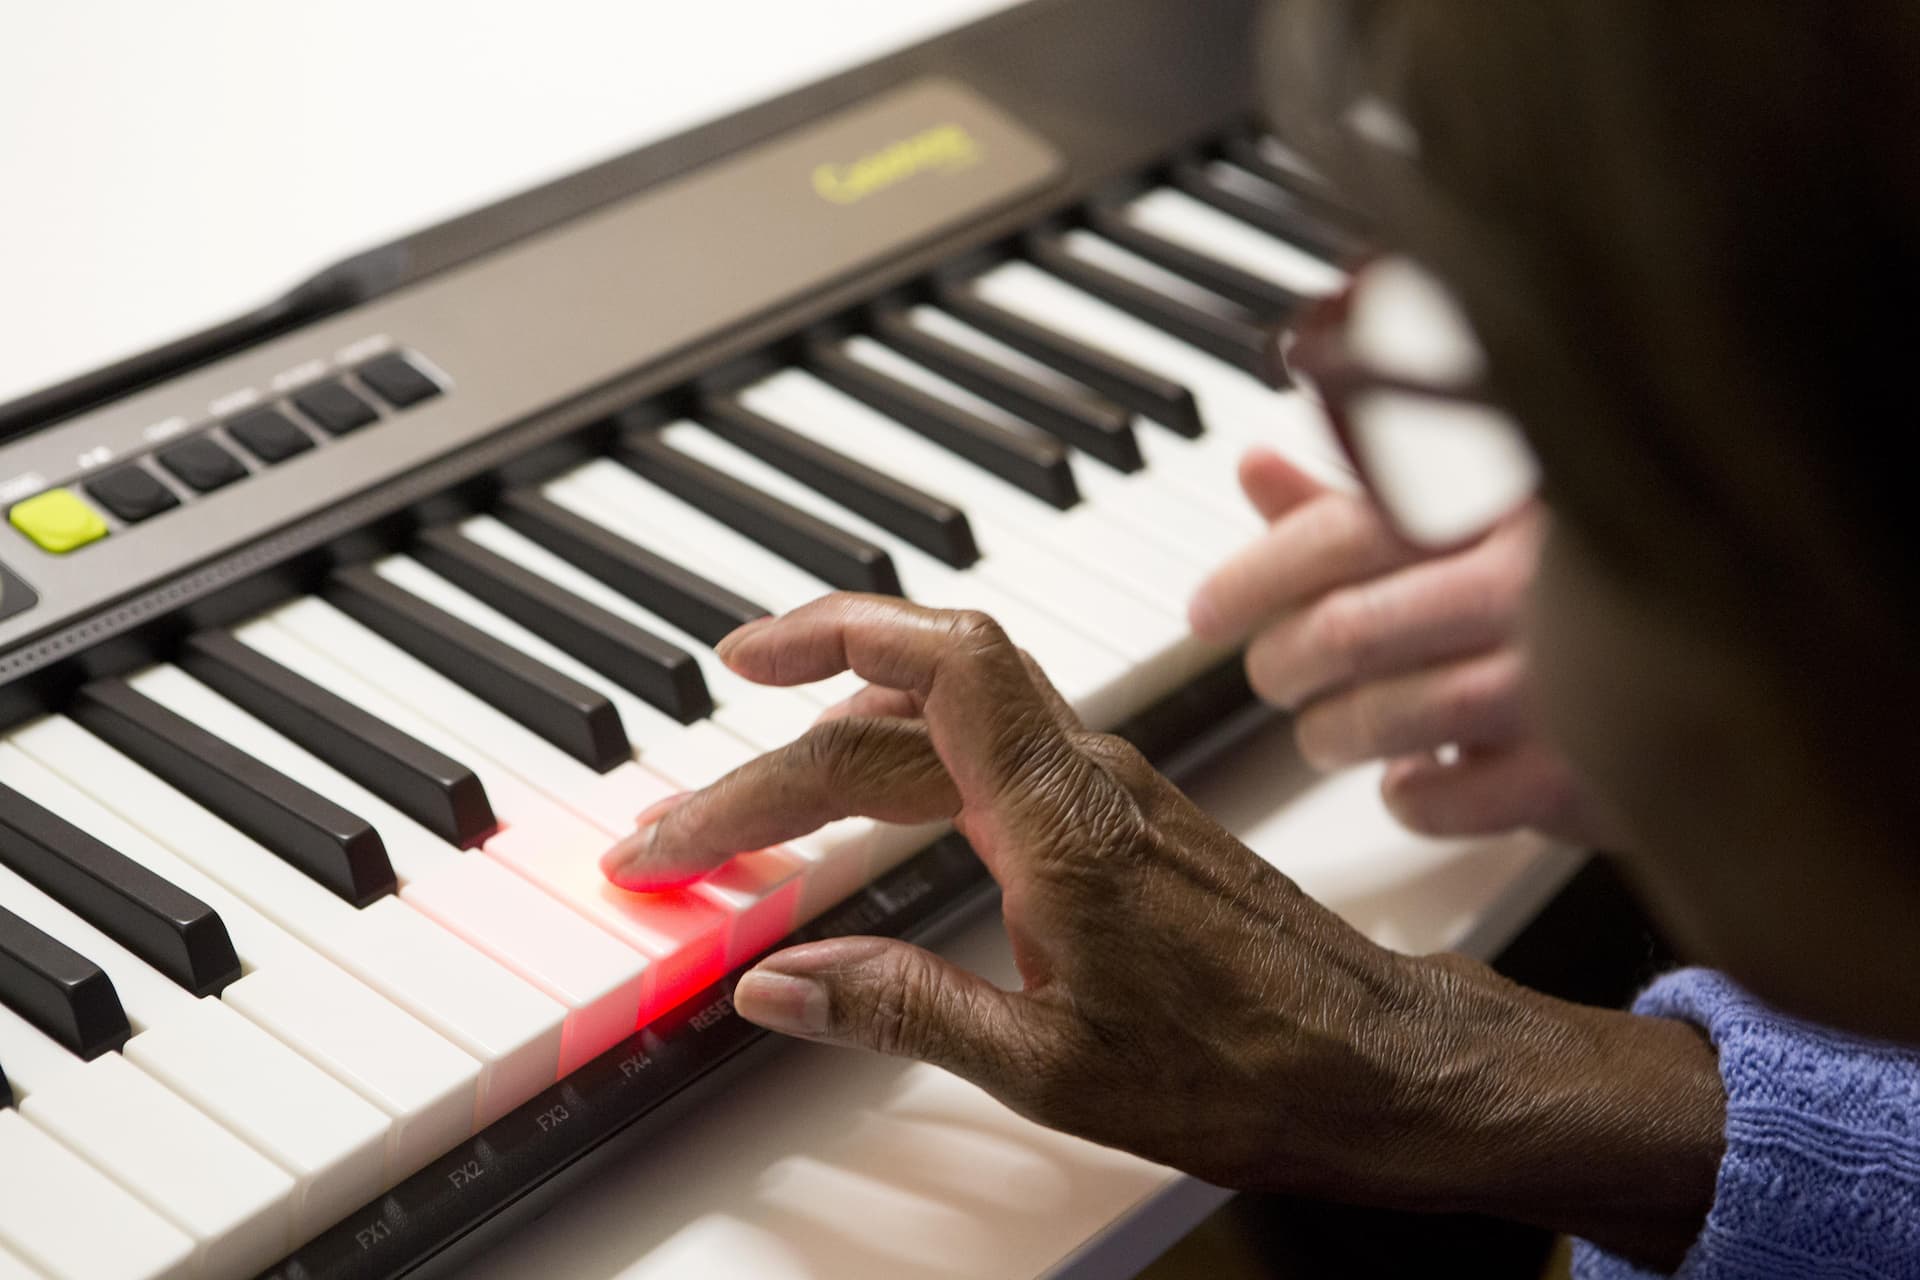 Woman plays a note on the Casio keyboard and the key lights up